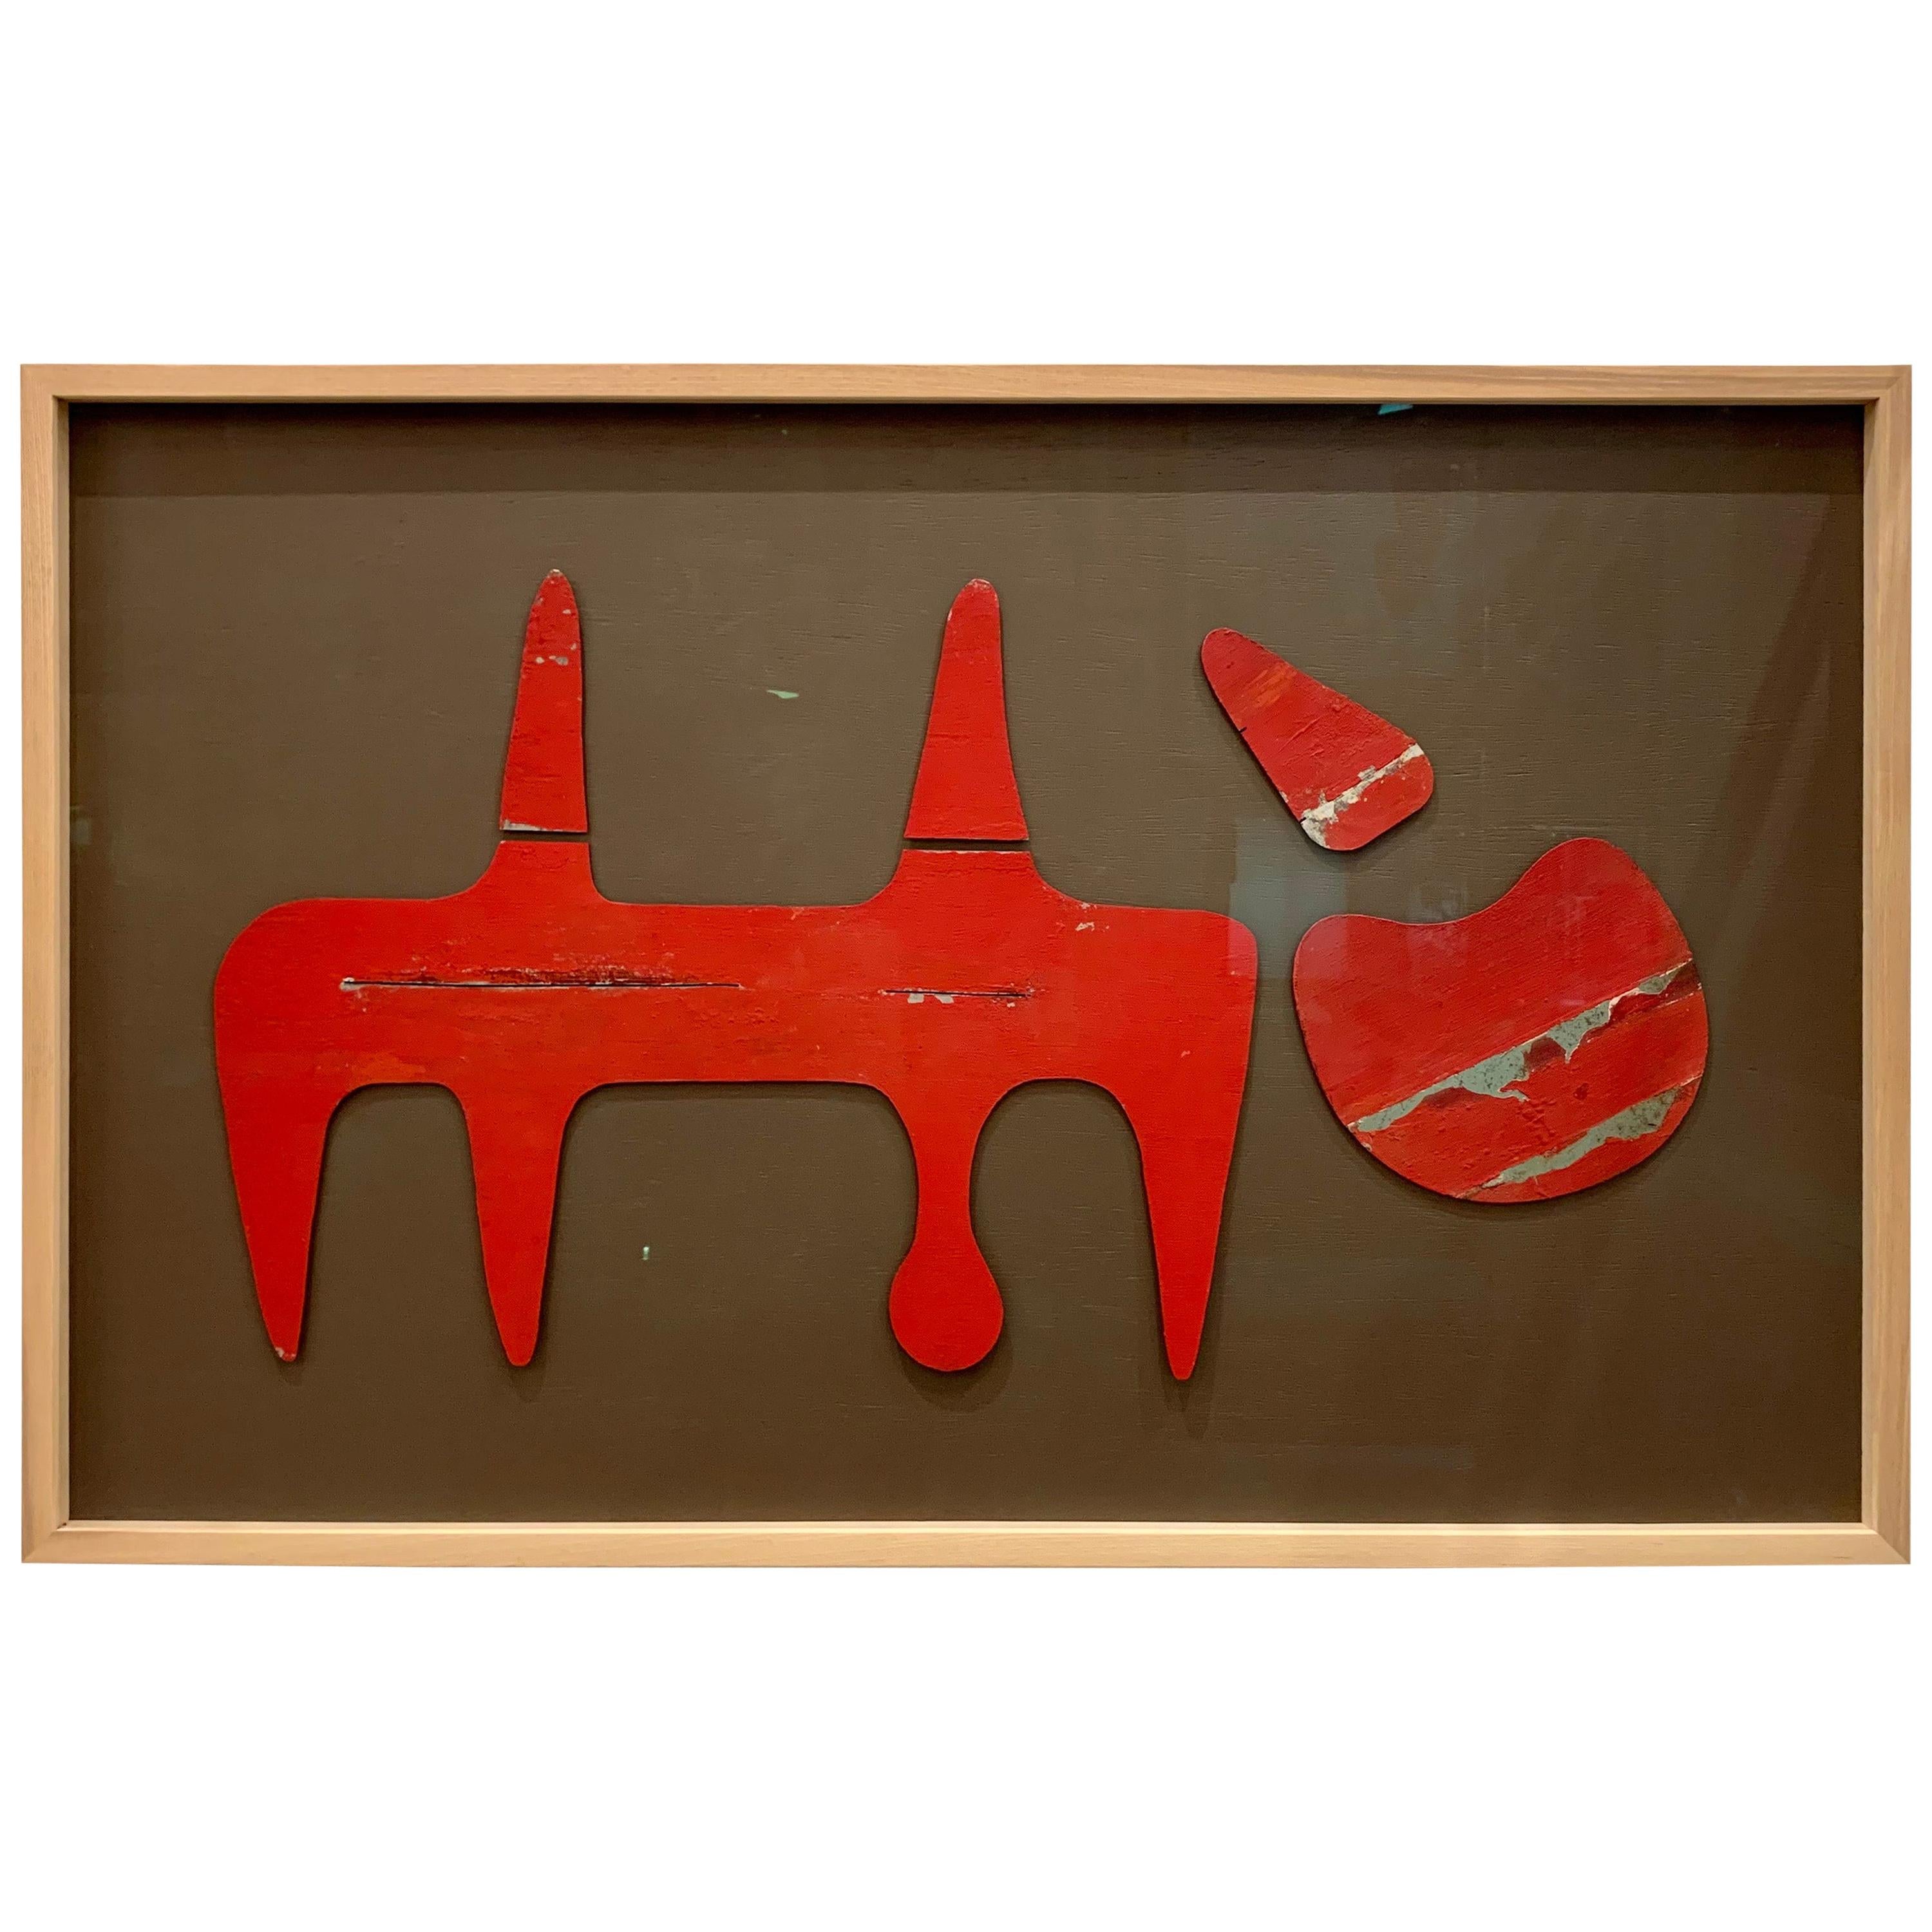 Sculptural Vintage Painted Metal Cut-Outs, Mounted and Framed